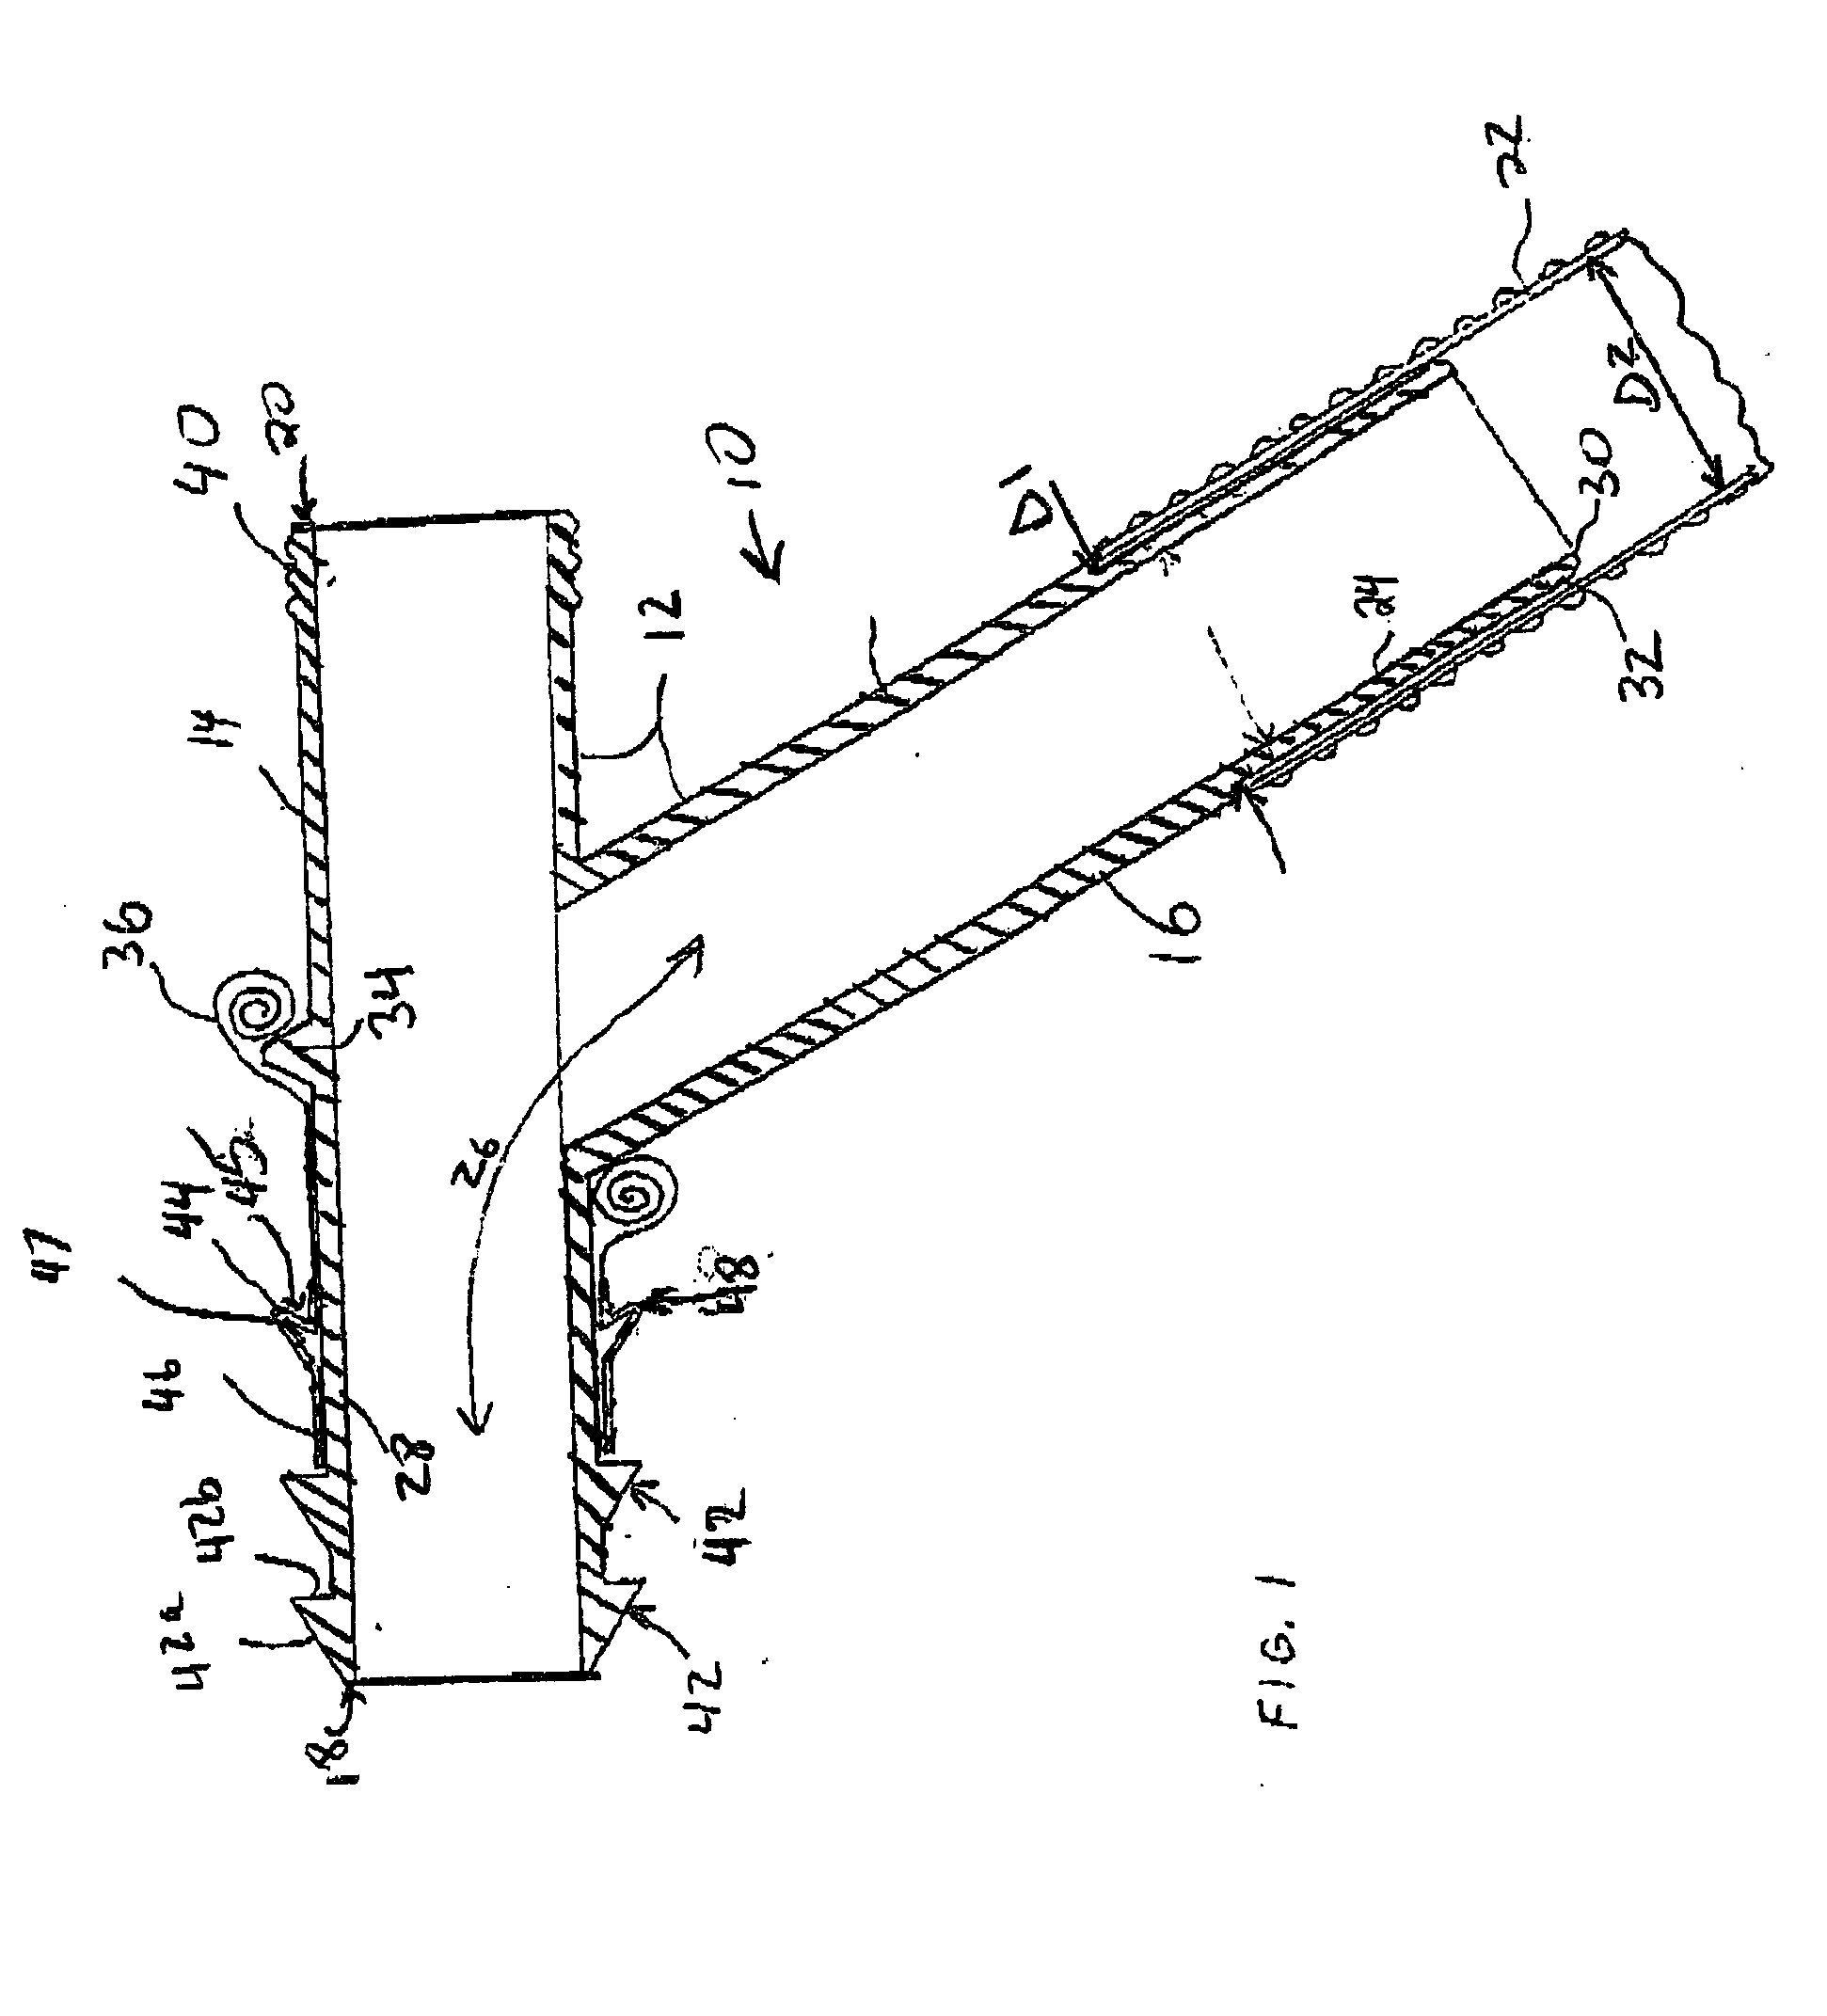 Apparatus and method for intestinal irrigation